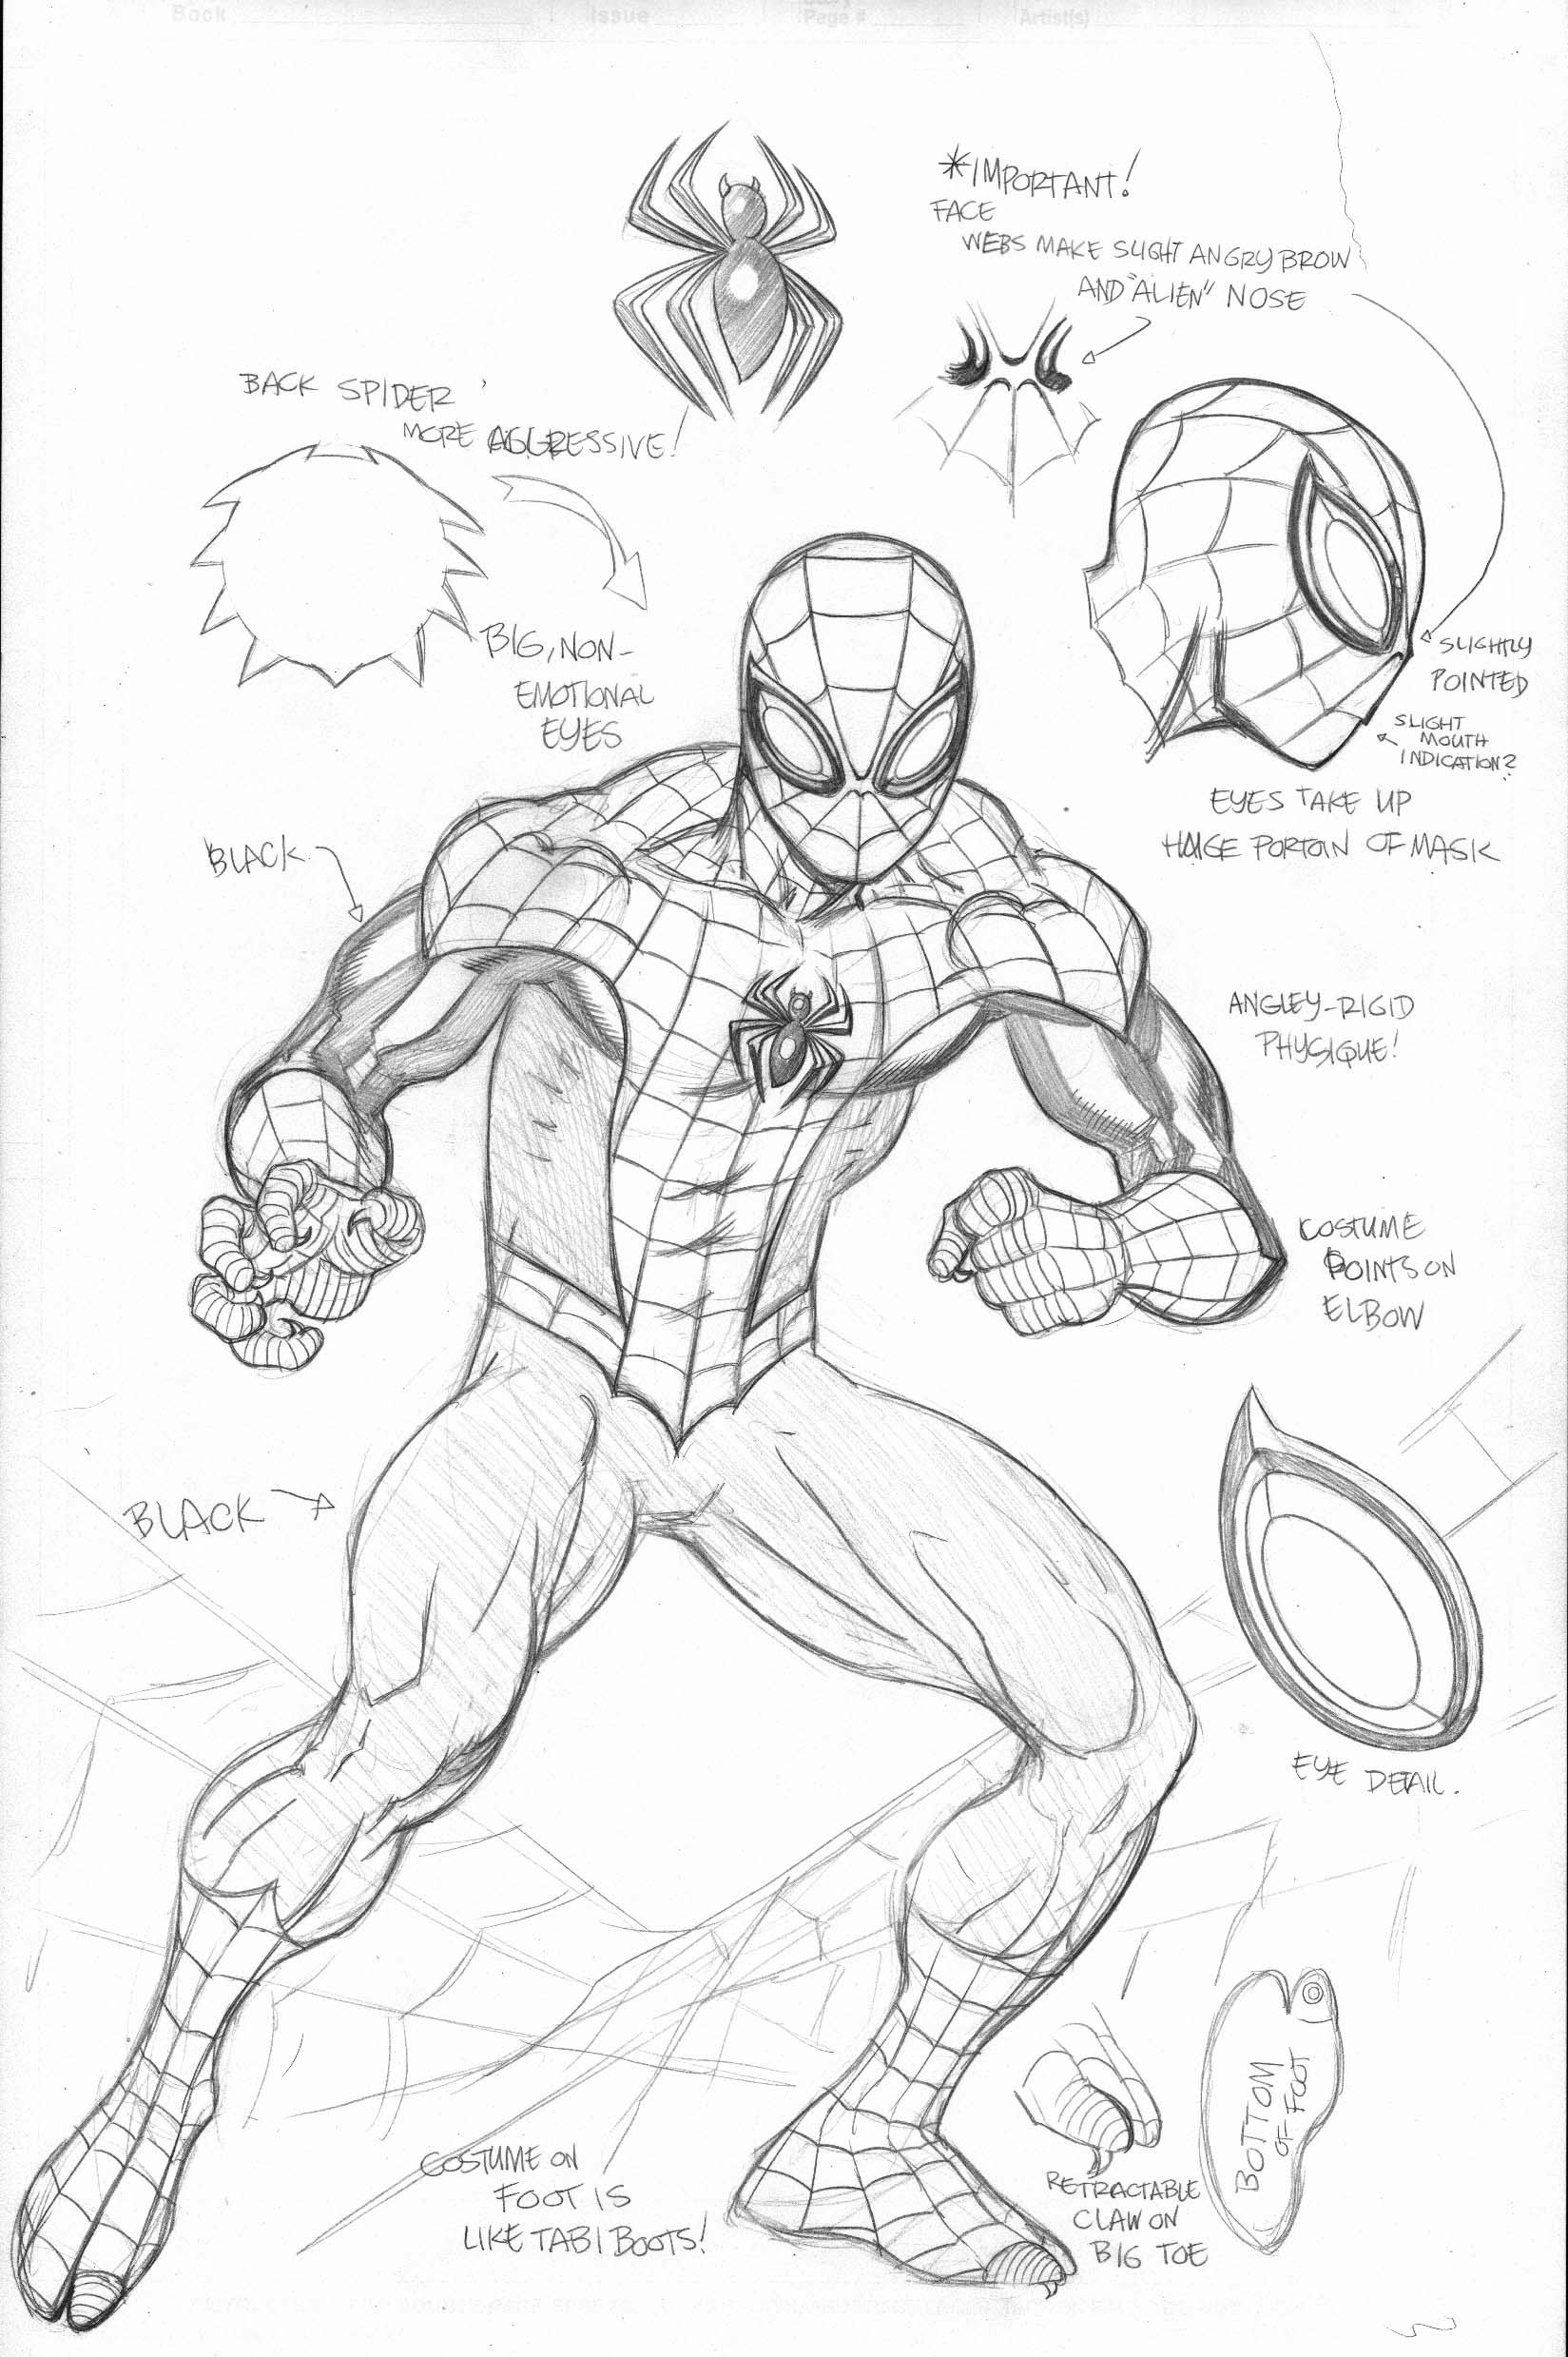 Spectacular Spiderman Coloring Pages Photograph | ... jpg -